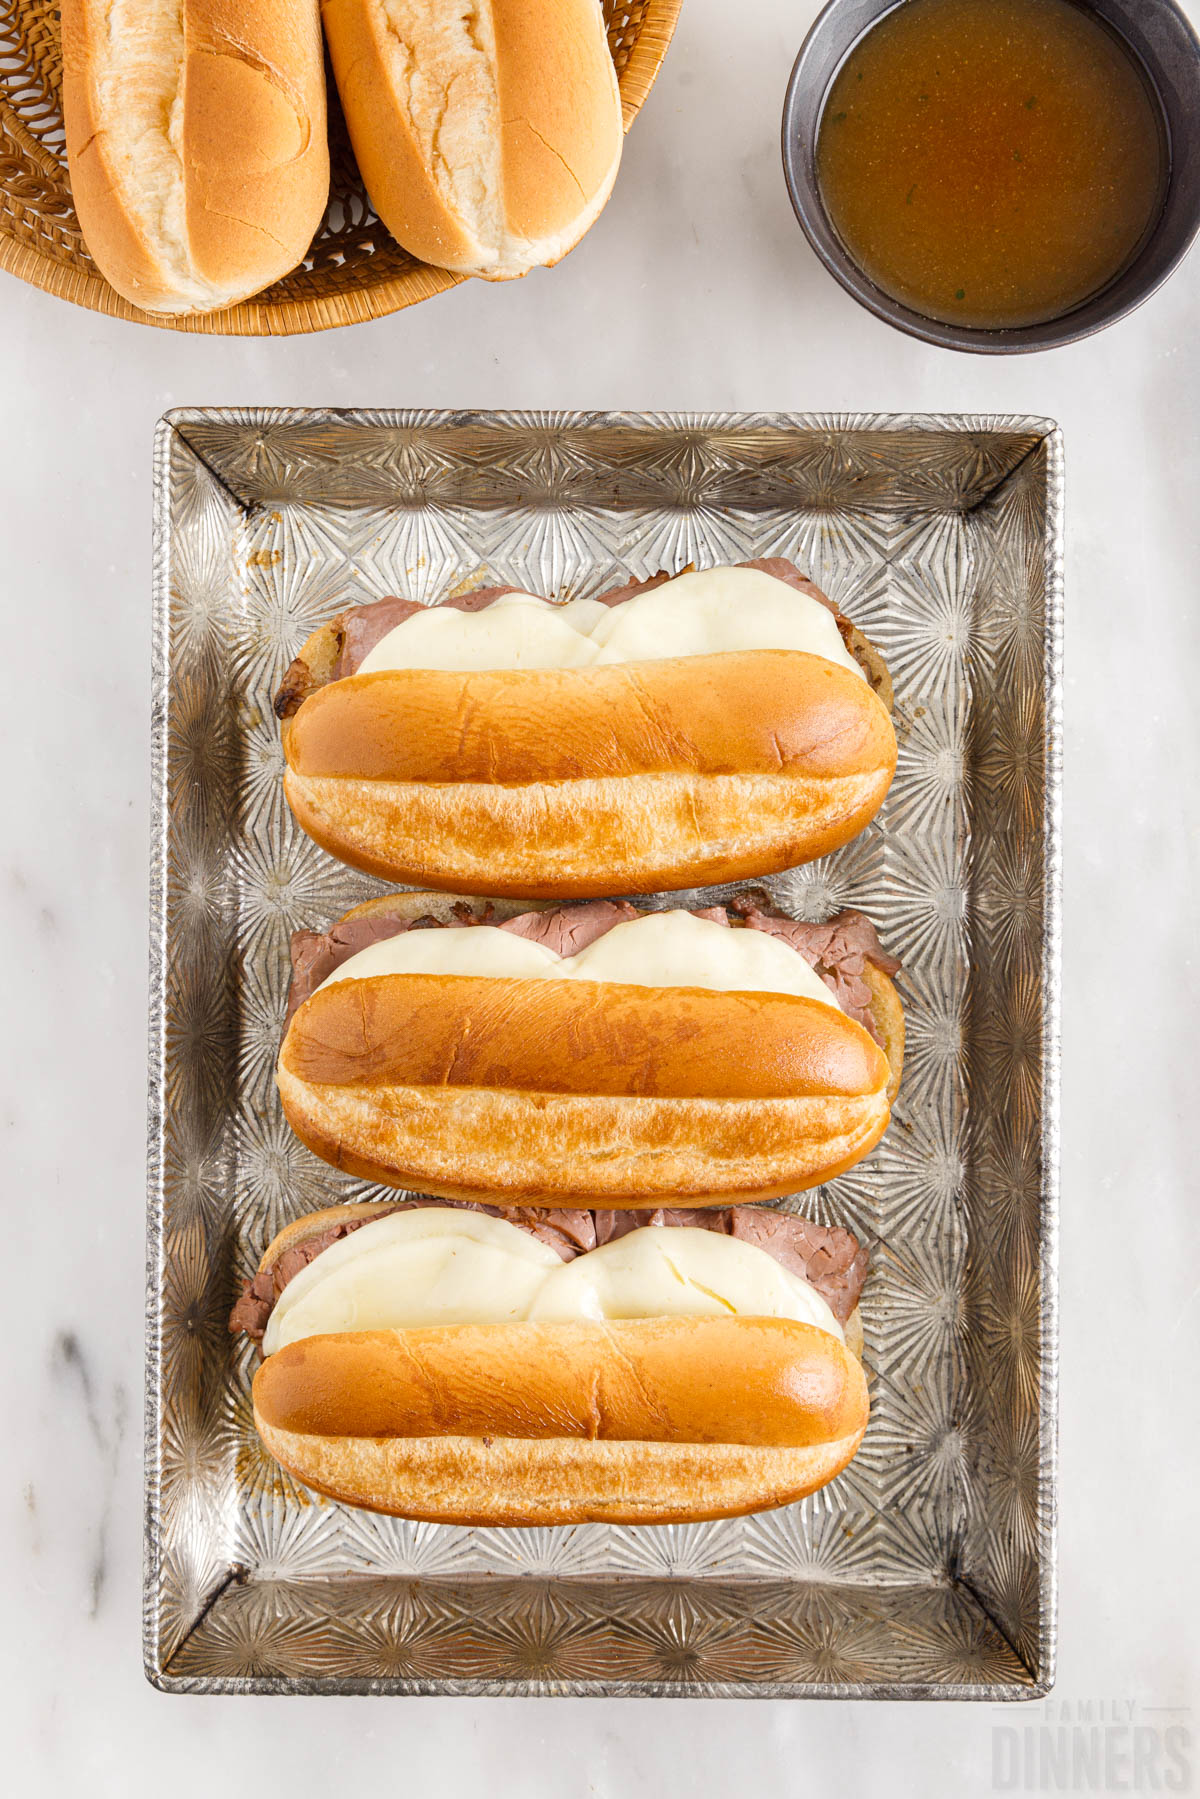 baked french dip sandwiches in a baking dish